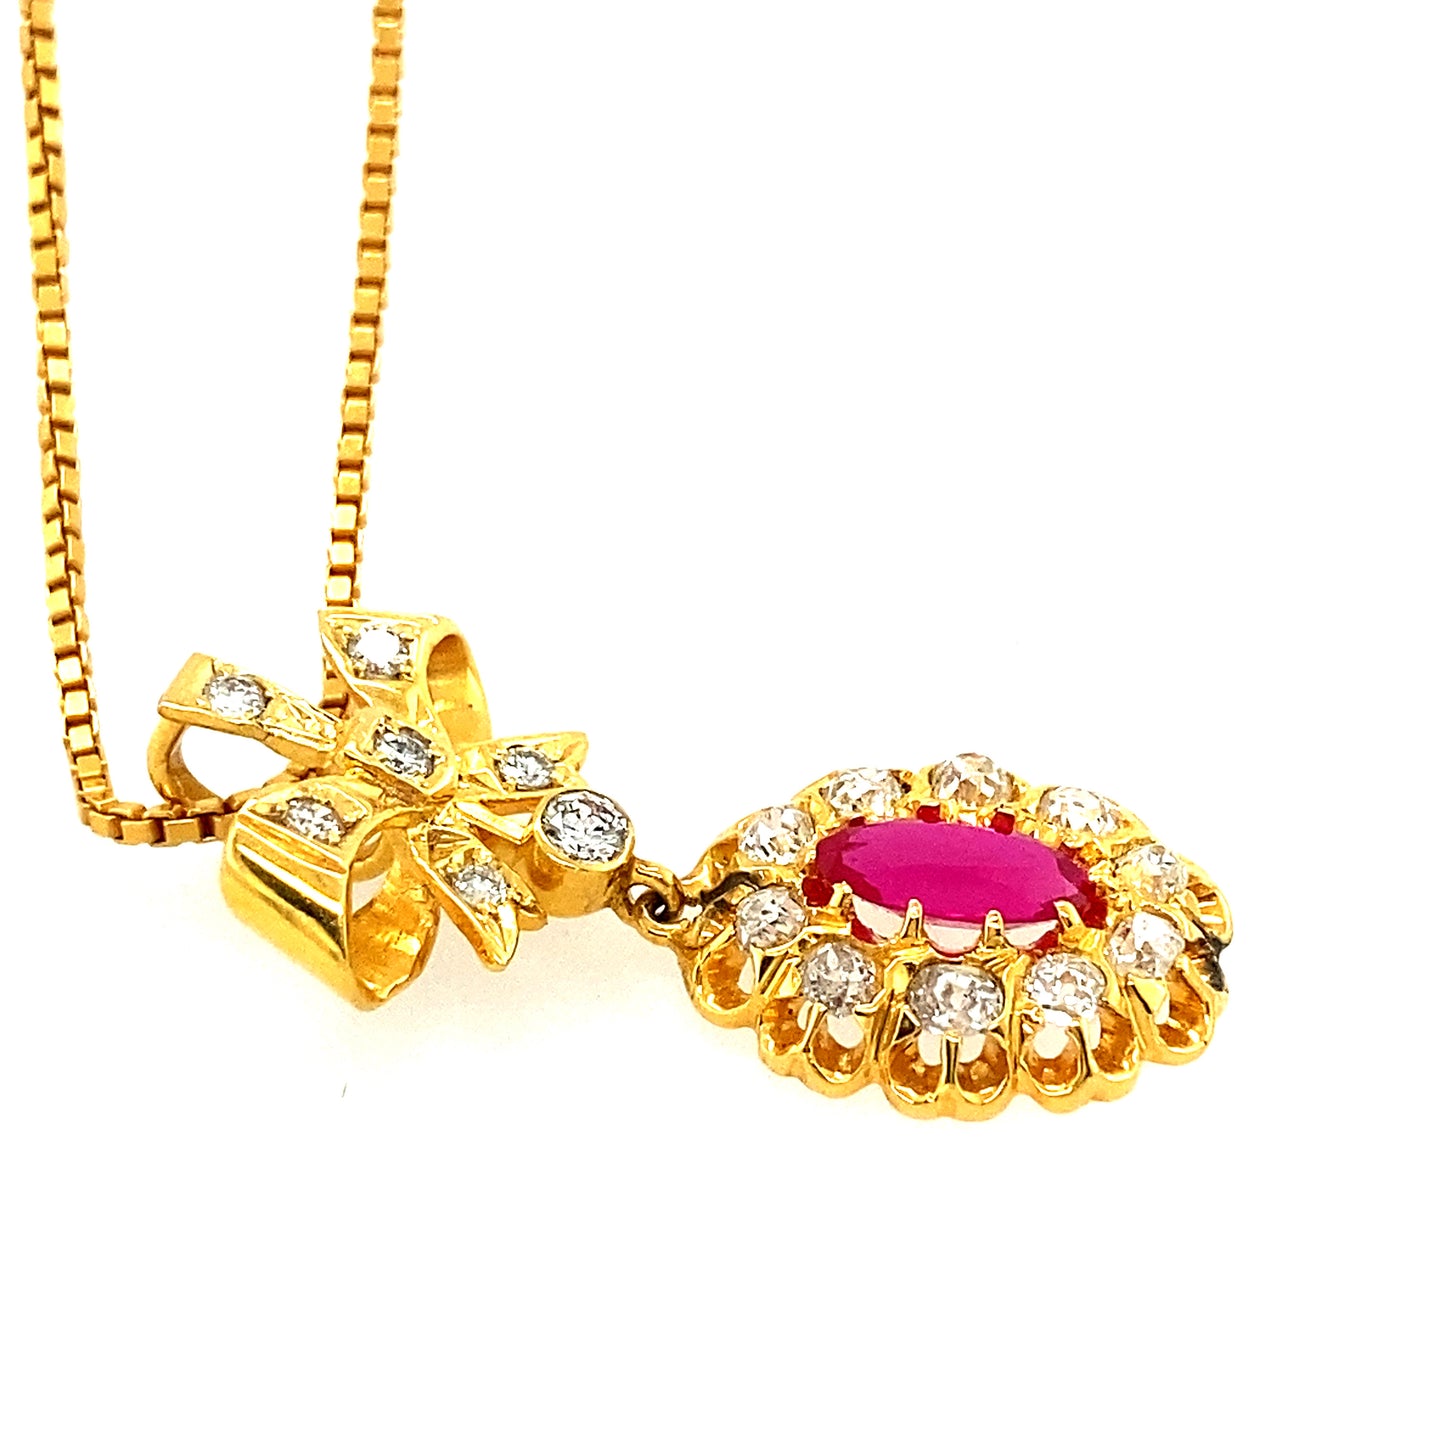 14k yellow gold chain with 14k Ruby Diamond pendant with pretty bow.